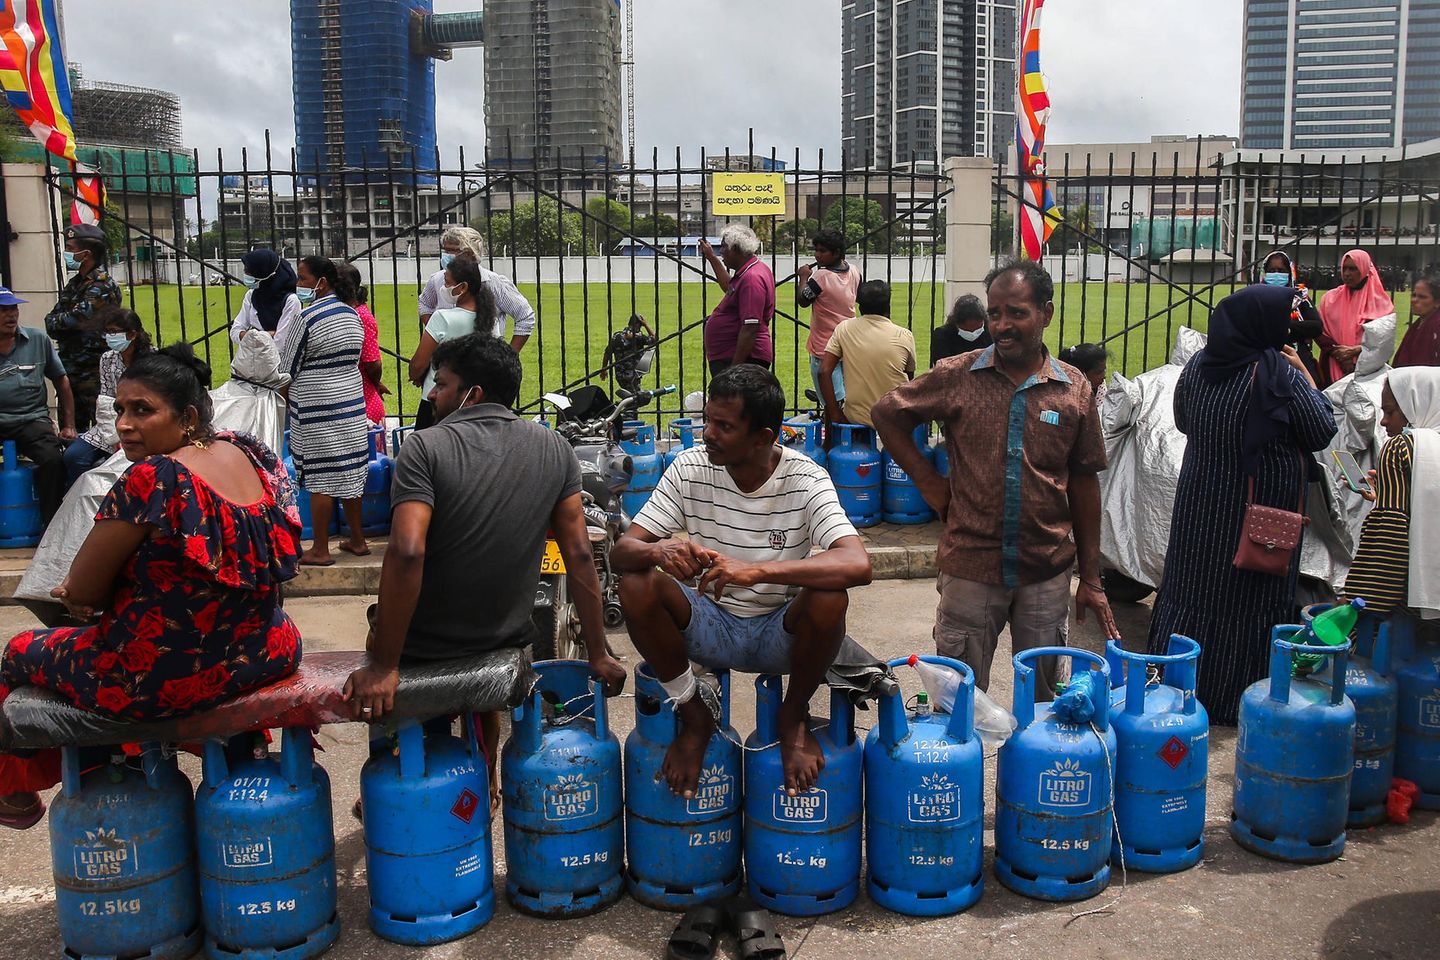 Rationalization in the context of the economic crisis: In the Colombo police station, people are waiting for gas to be delivered.